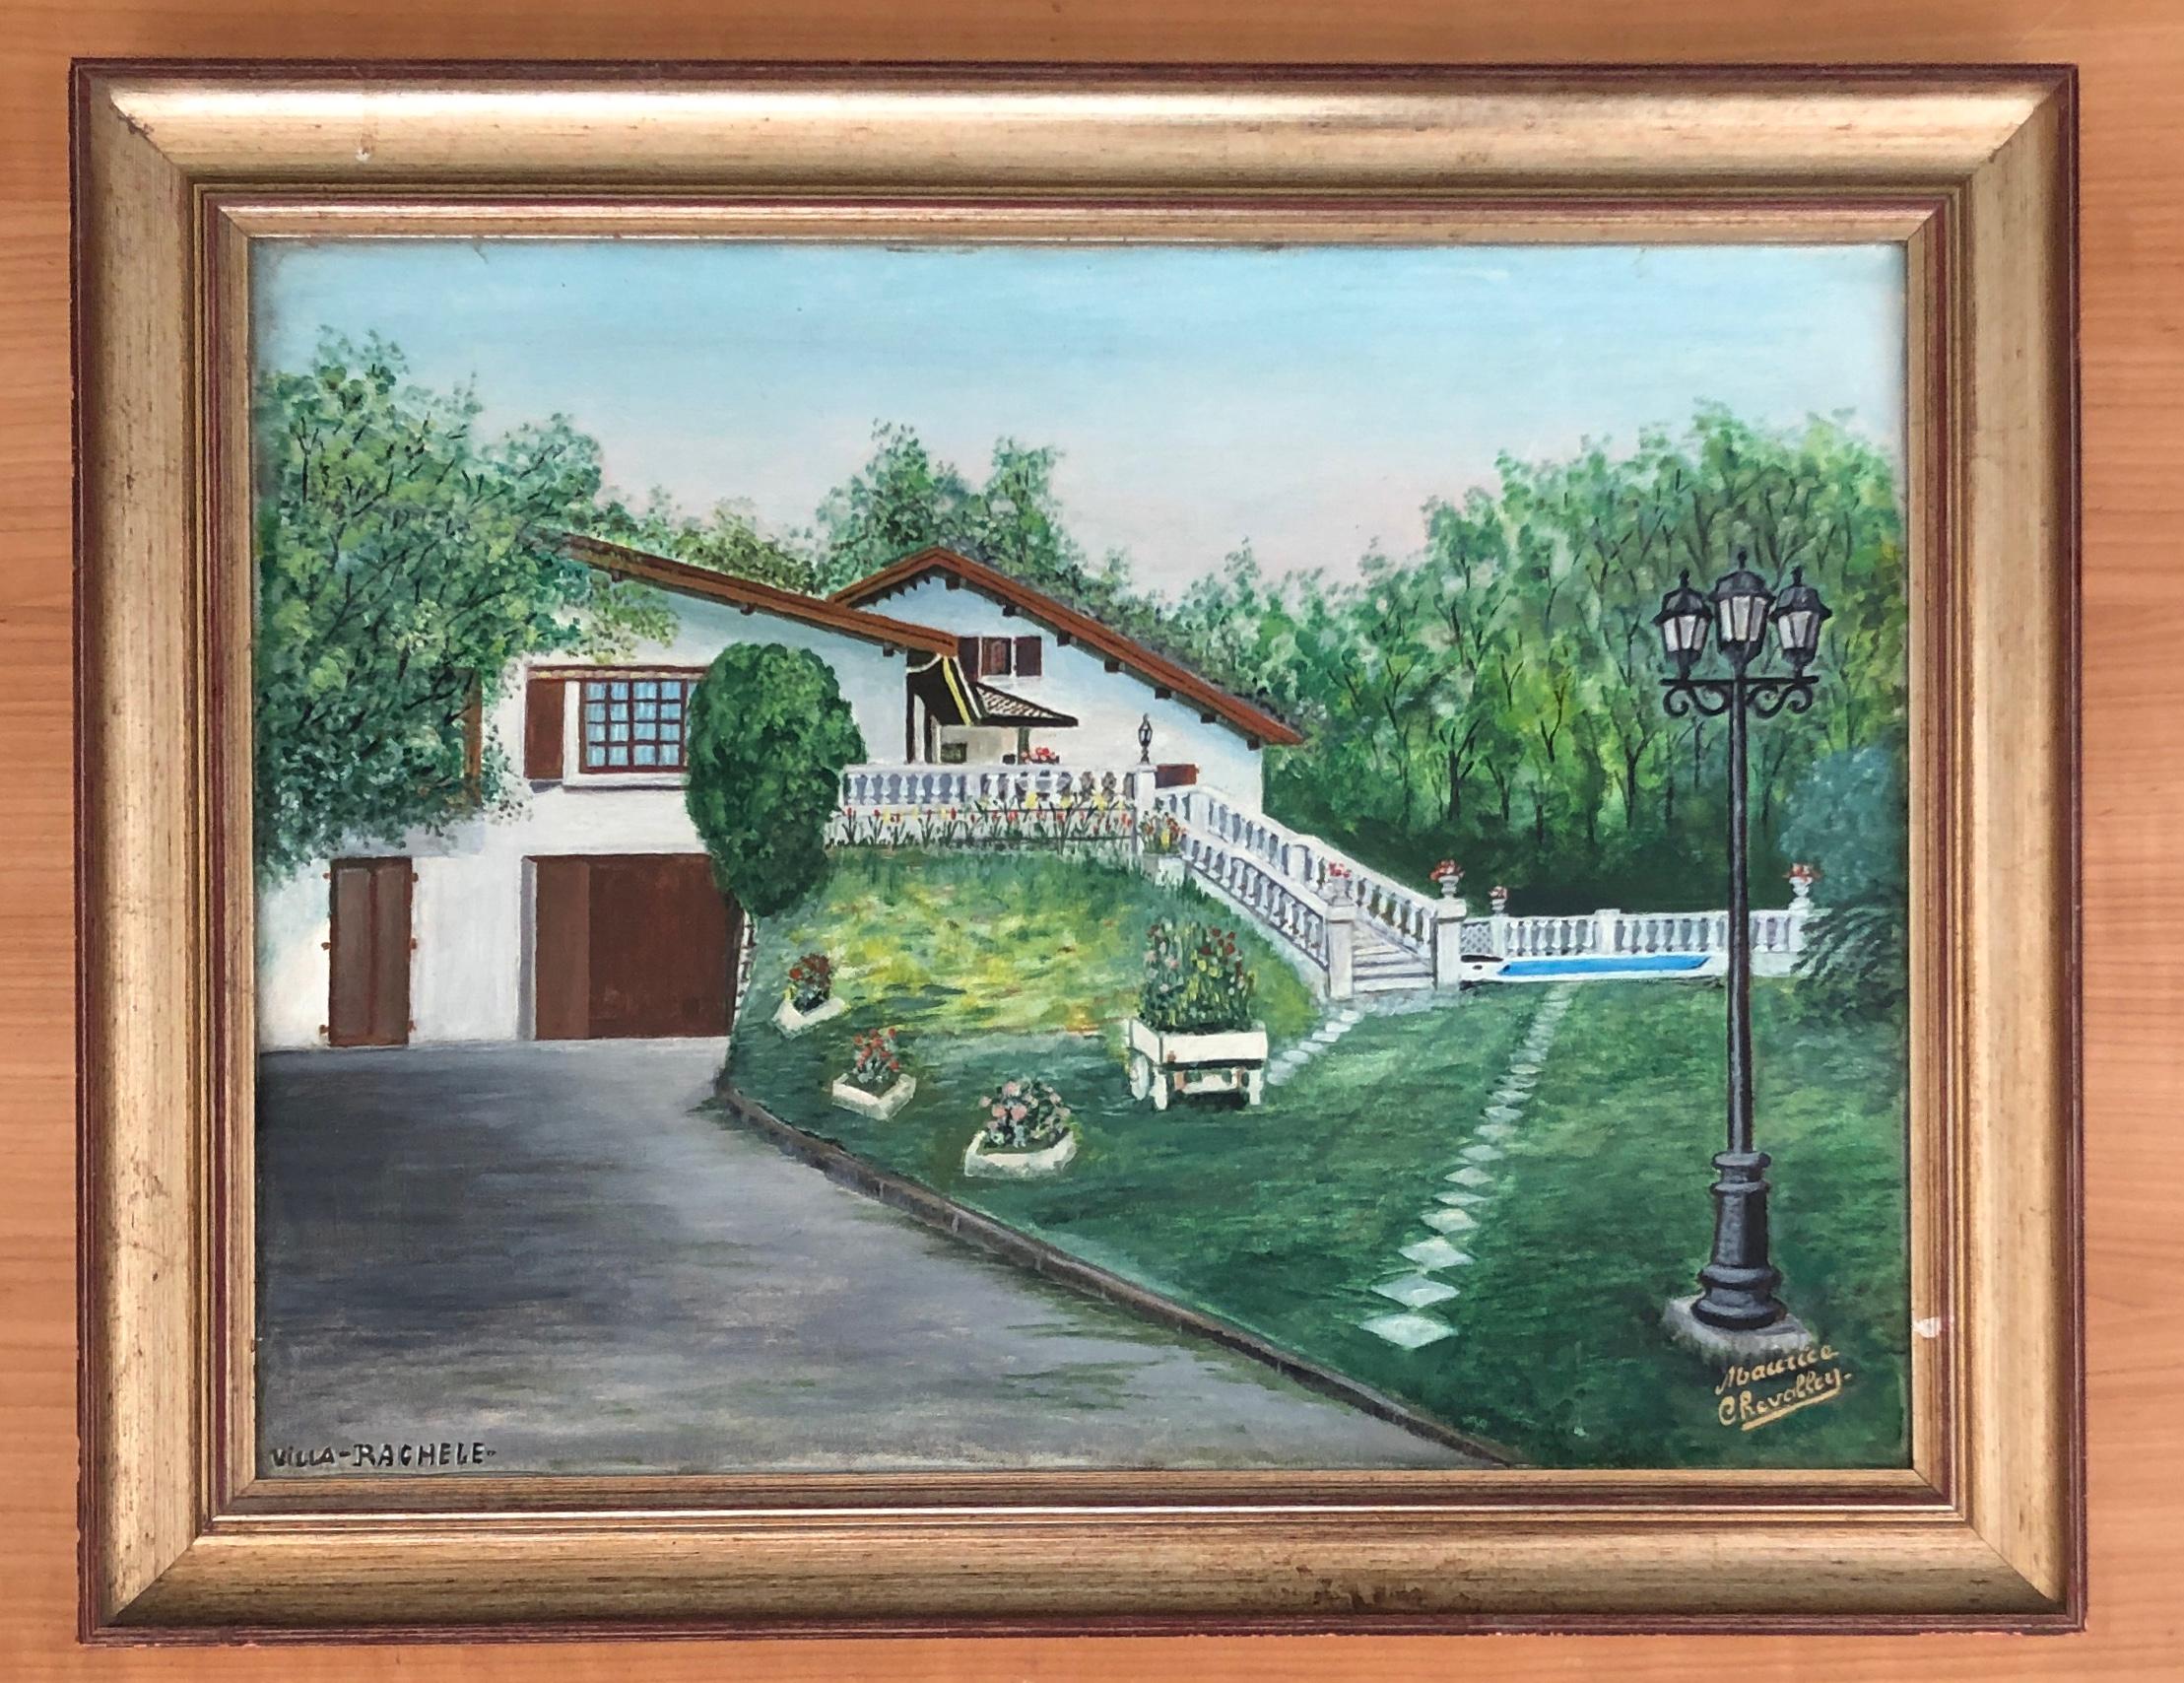 Villa Rachelle - Painting by Maurice Chevalley